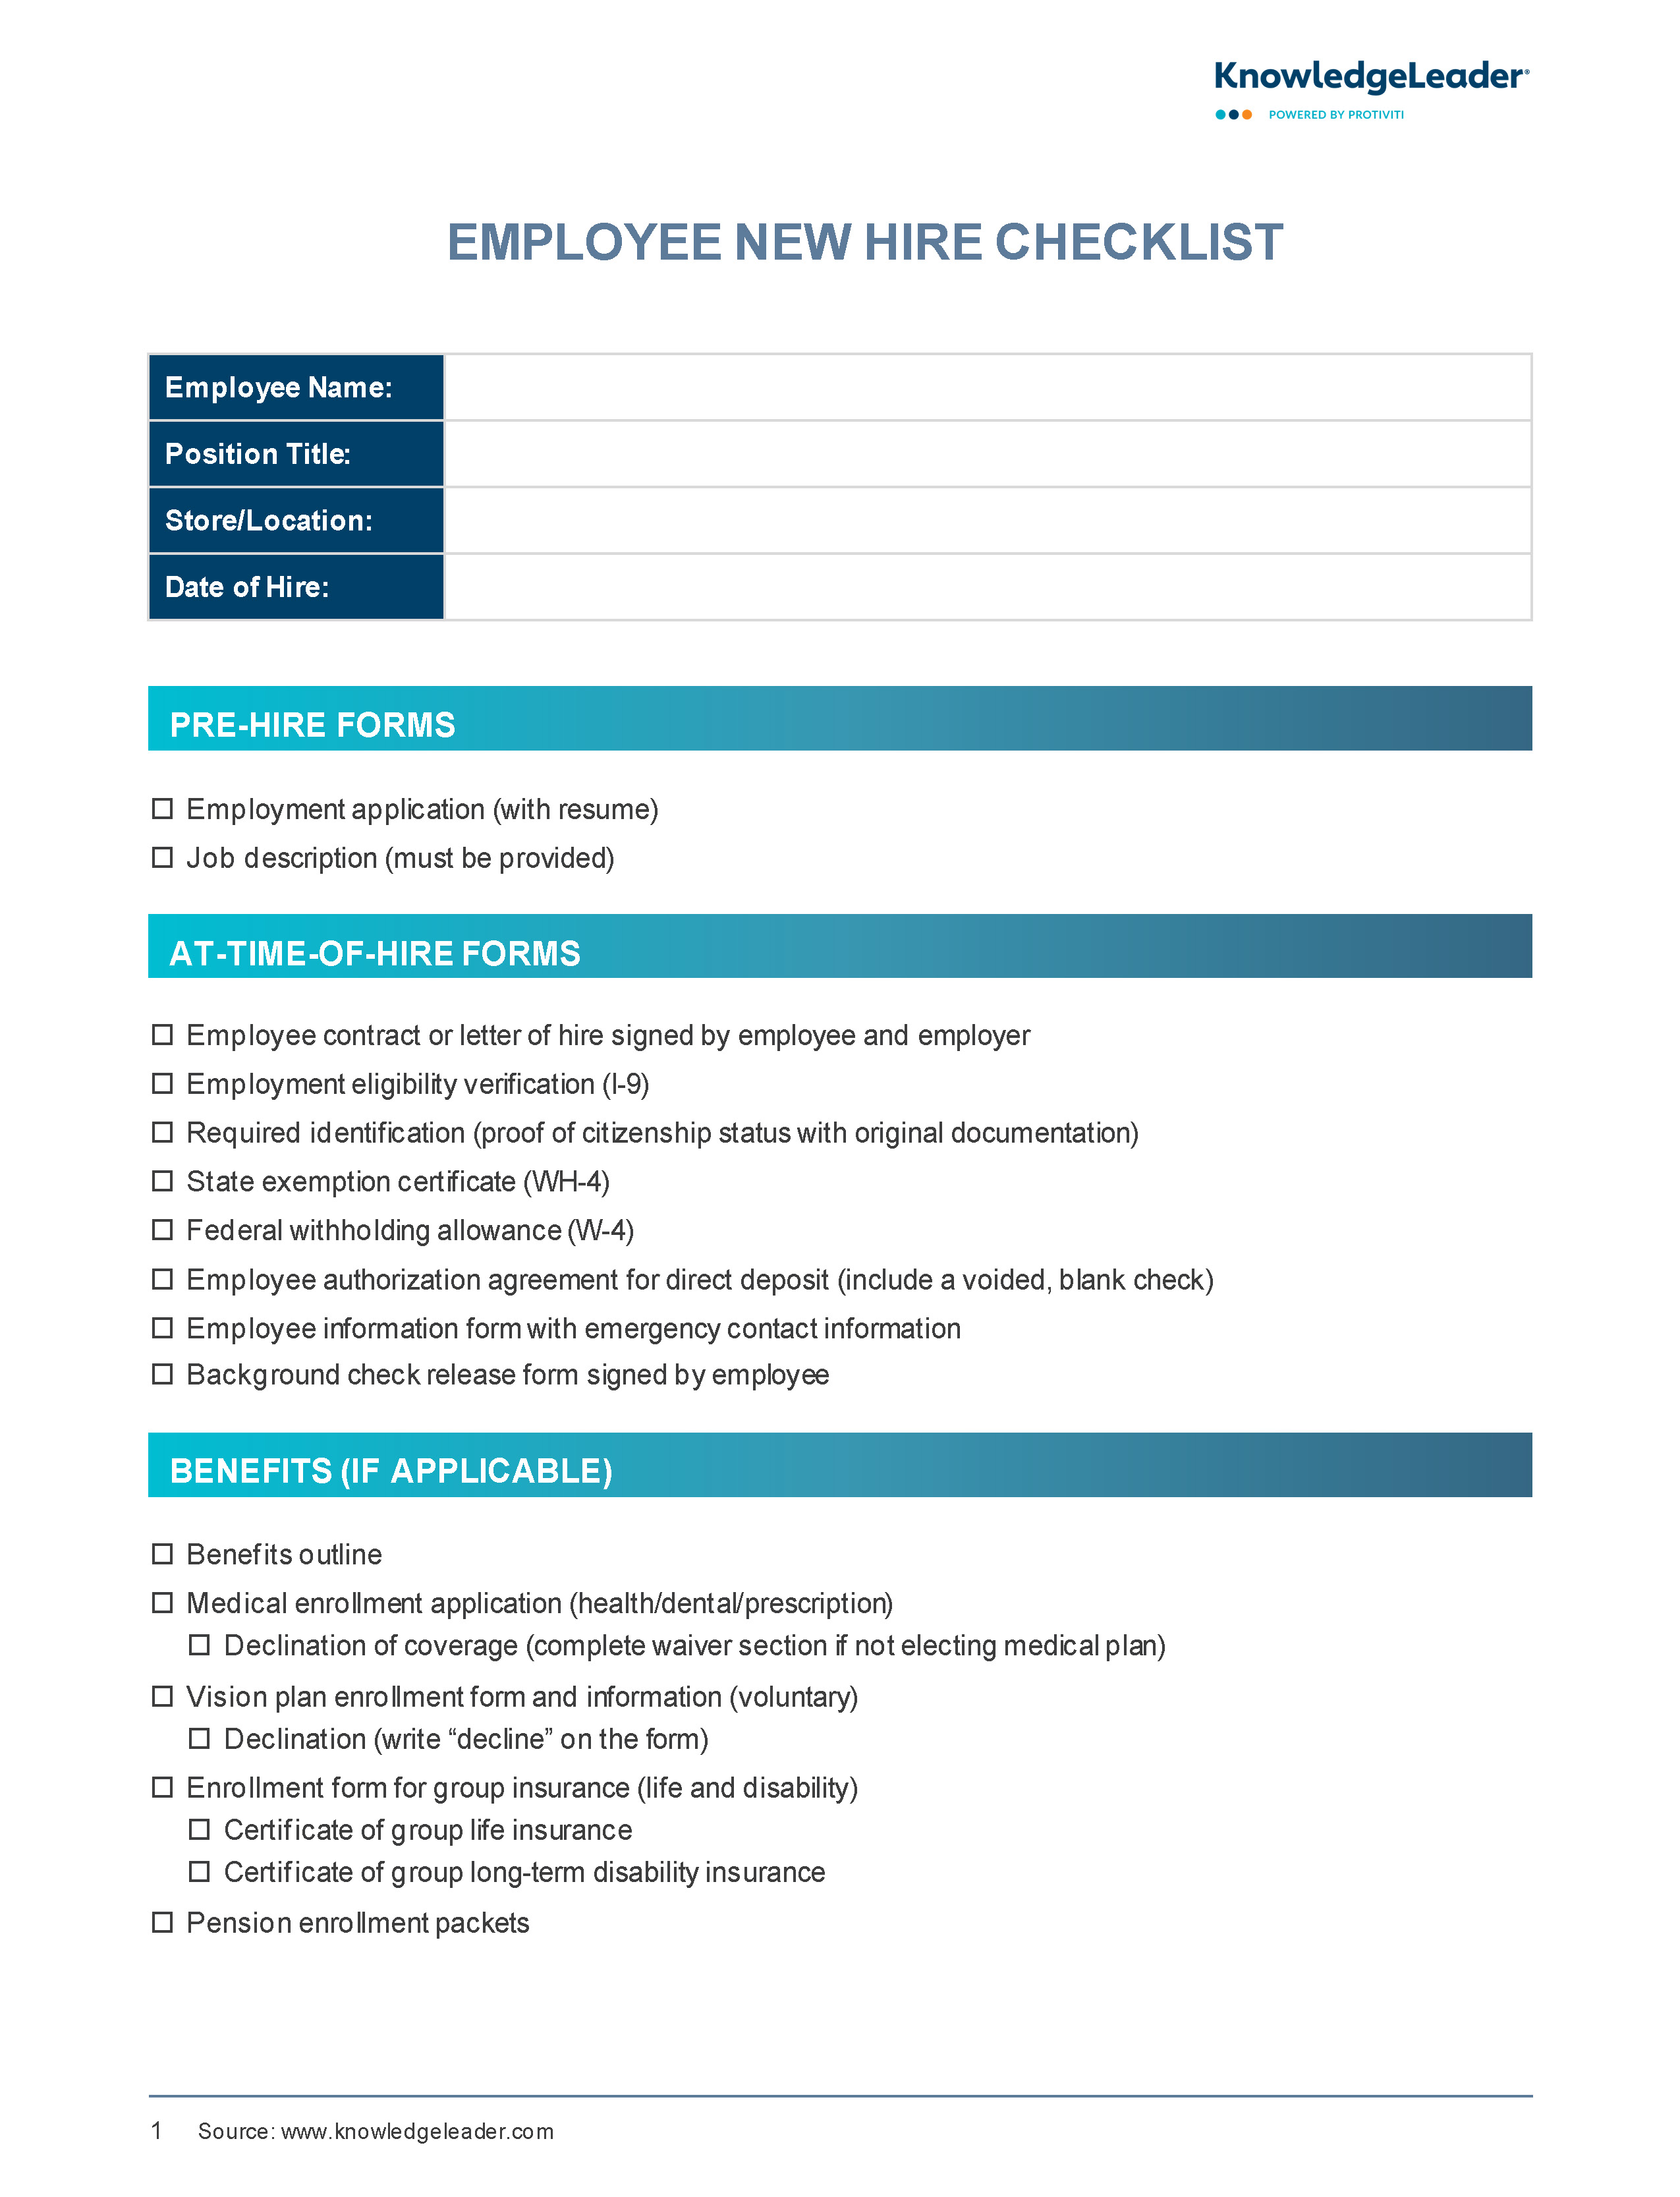 Screenshot of the first page of Employee New Hire Checklist